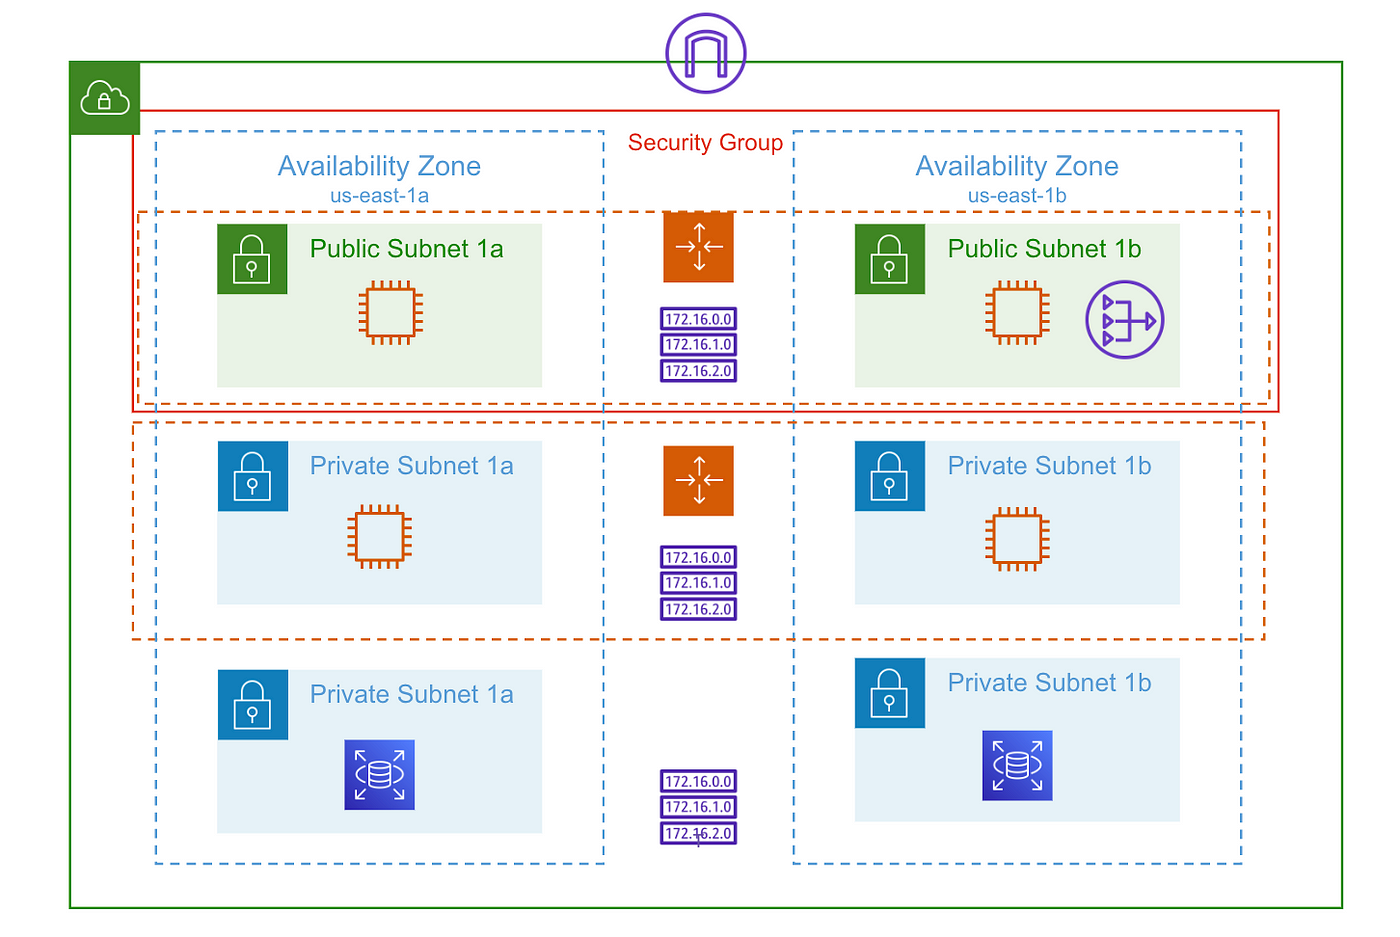 3-tier Architecture on AWS: End-to-end Infrastructure Design